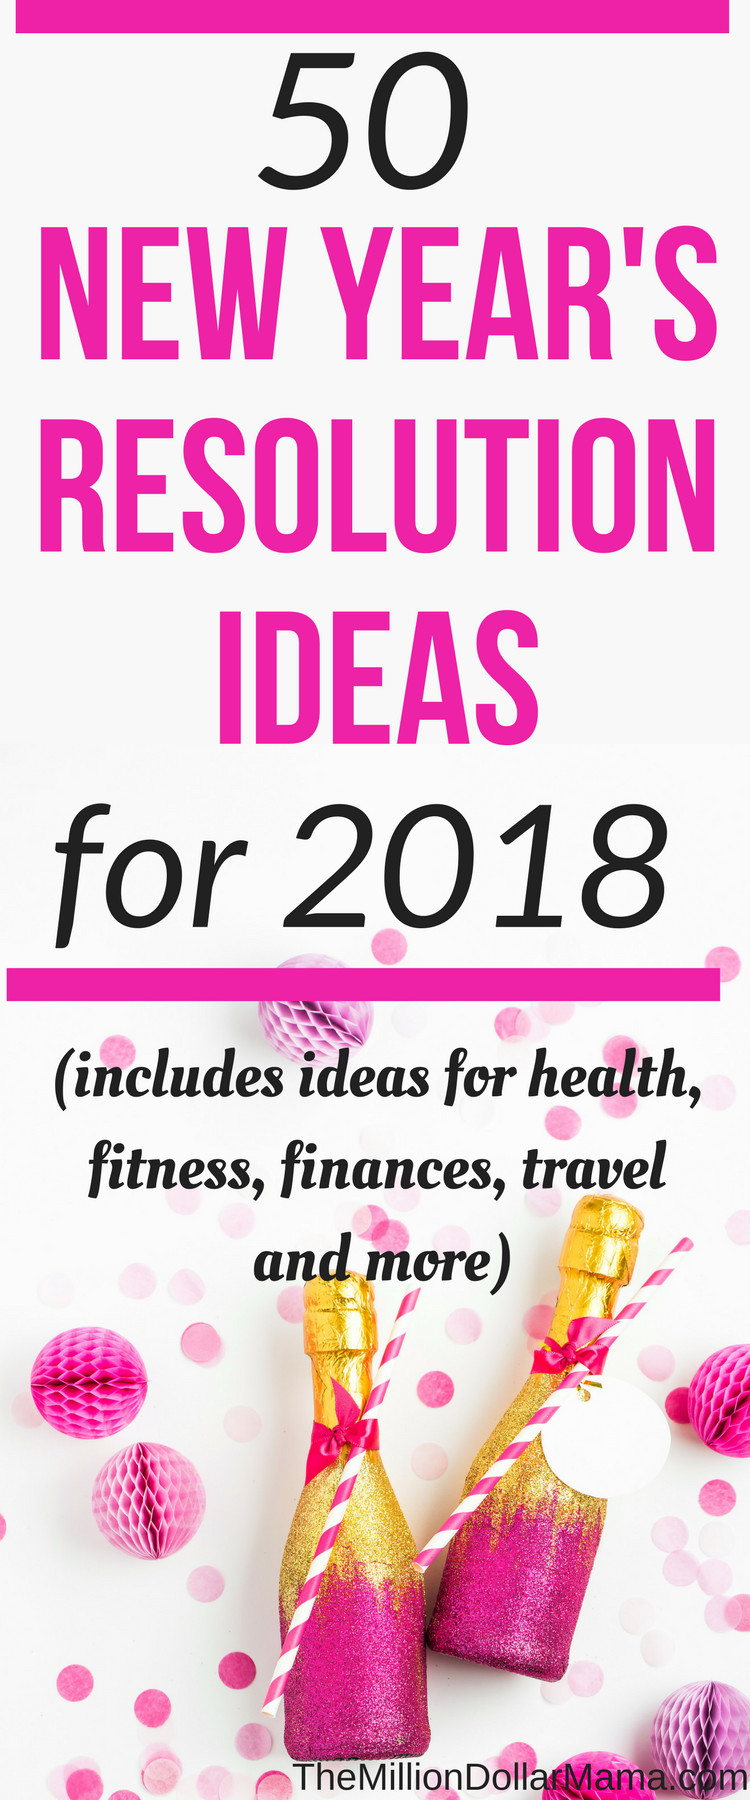 New Year Goals Ideas
 50 New Years Resolution Ideas To Help You Slay This Year